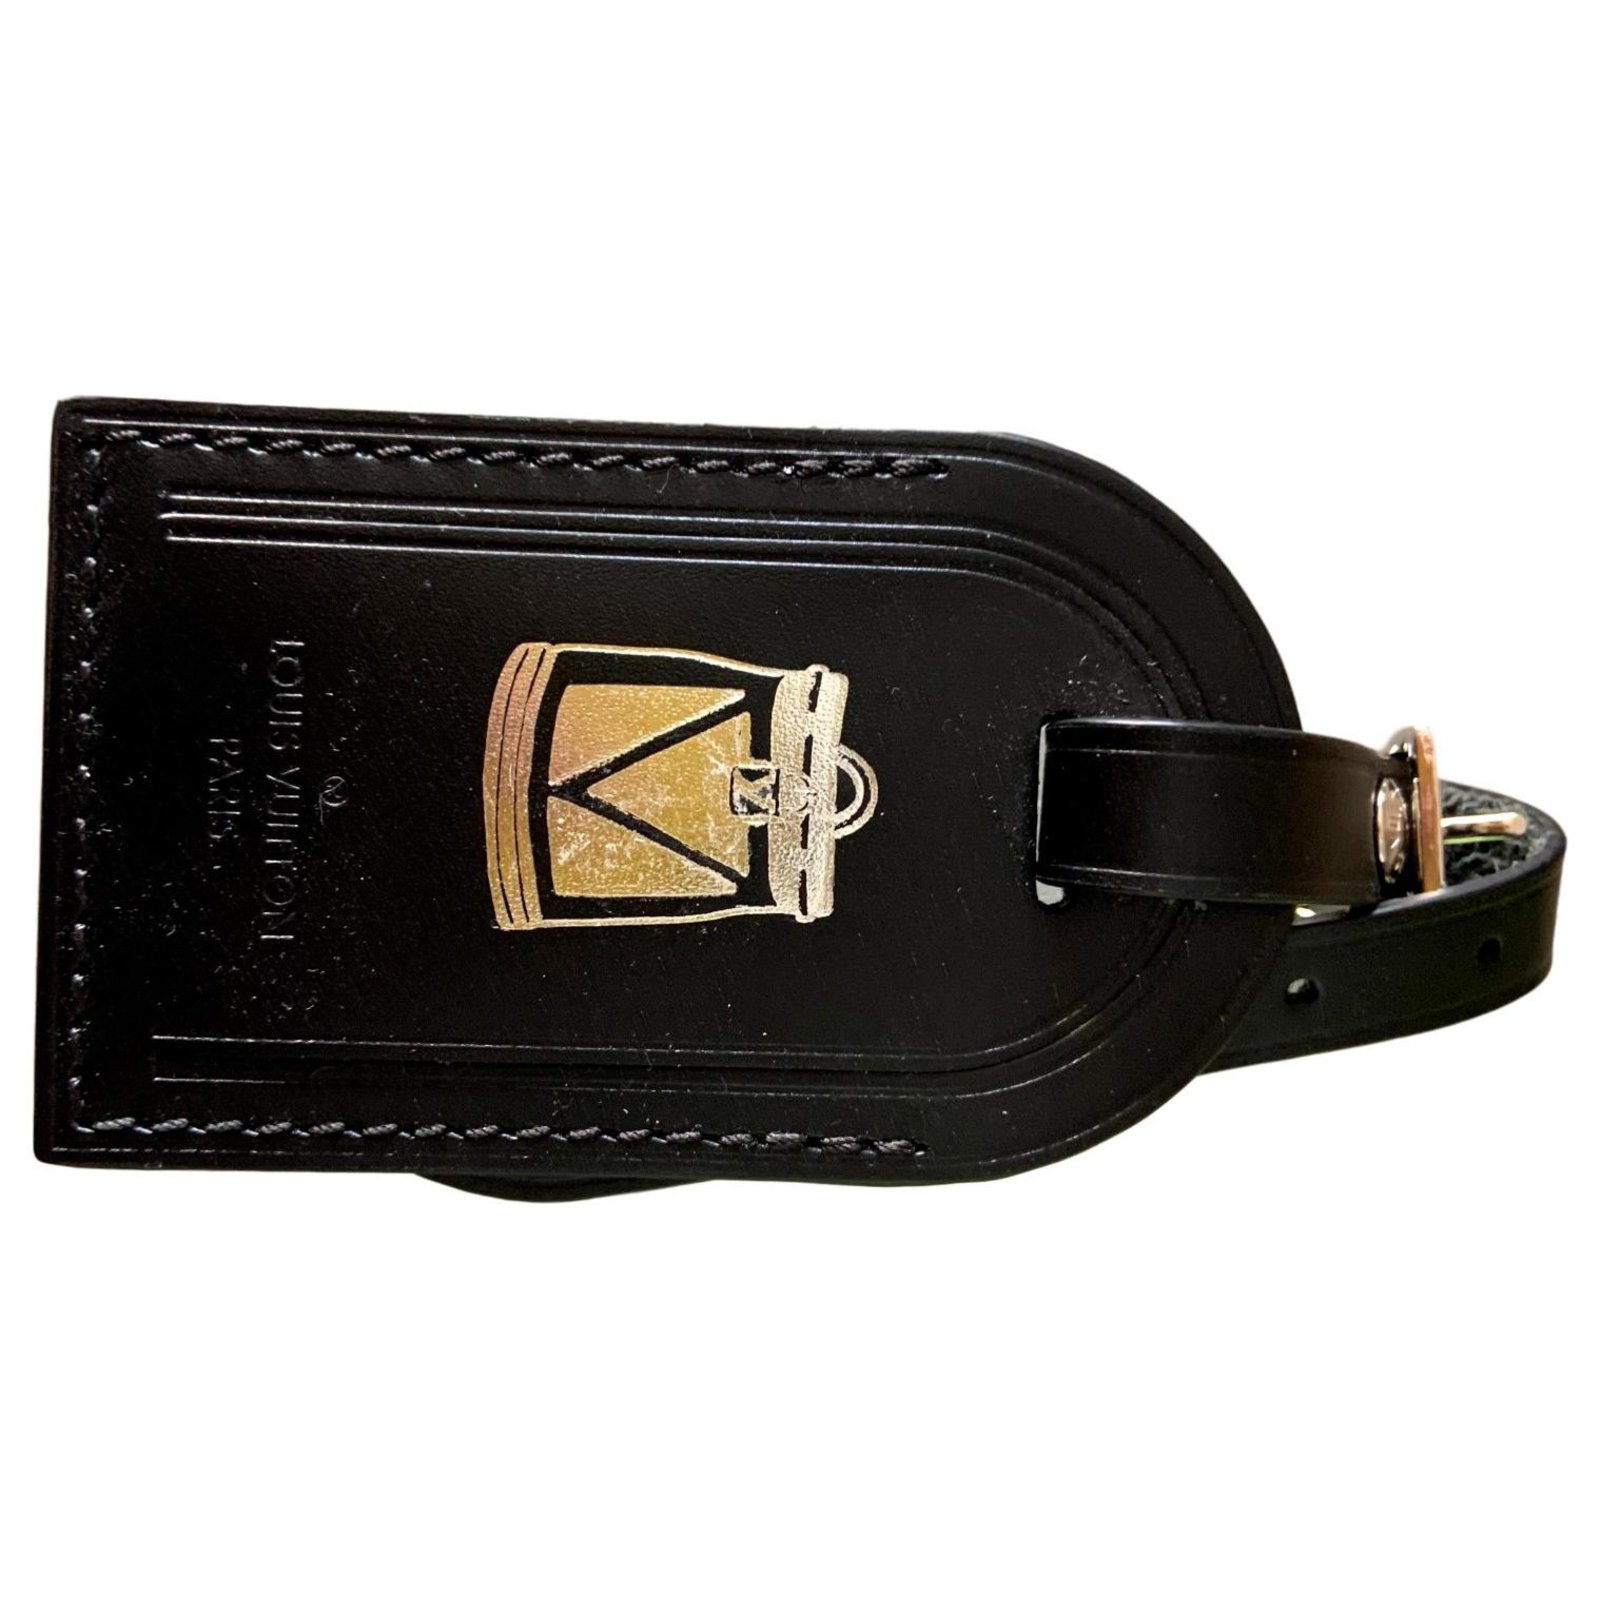 Louis Vuitton Luggage tag black large size hot stamped Madrid Time